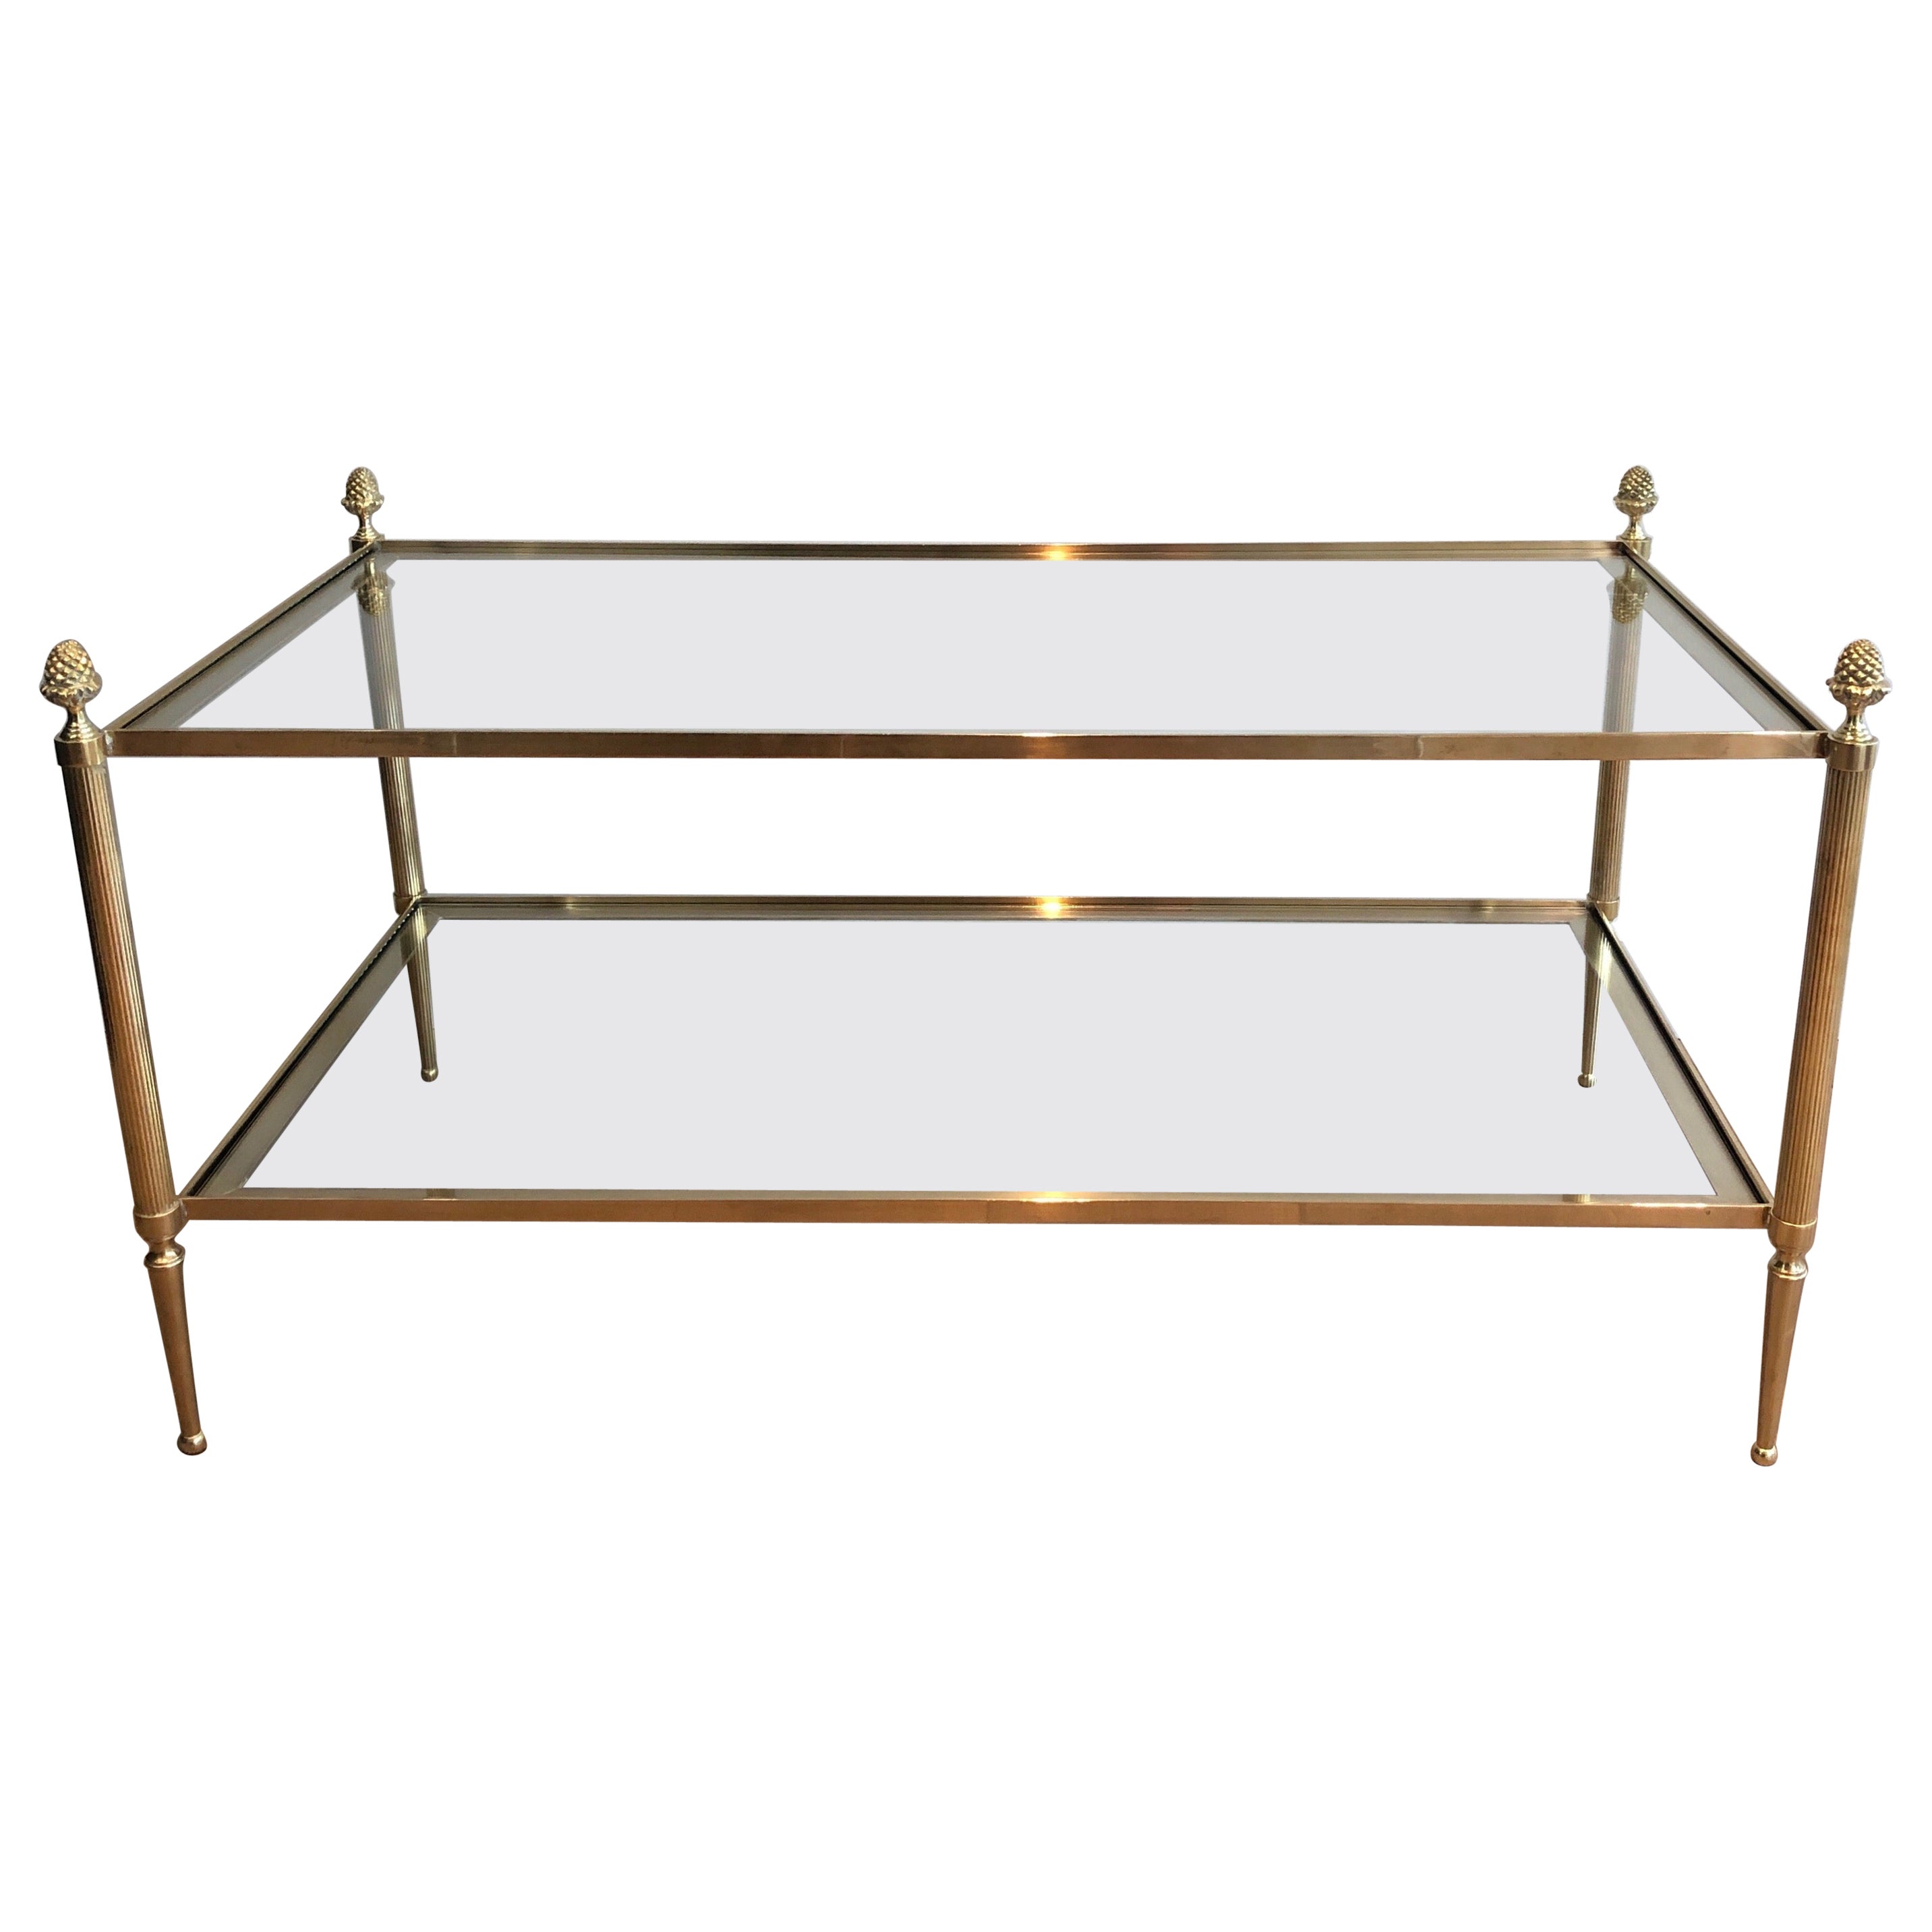 Neoclassical Style Maison Baguès Two Tiers Brass Coffee Table. Circa 1940